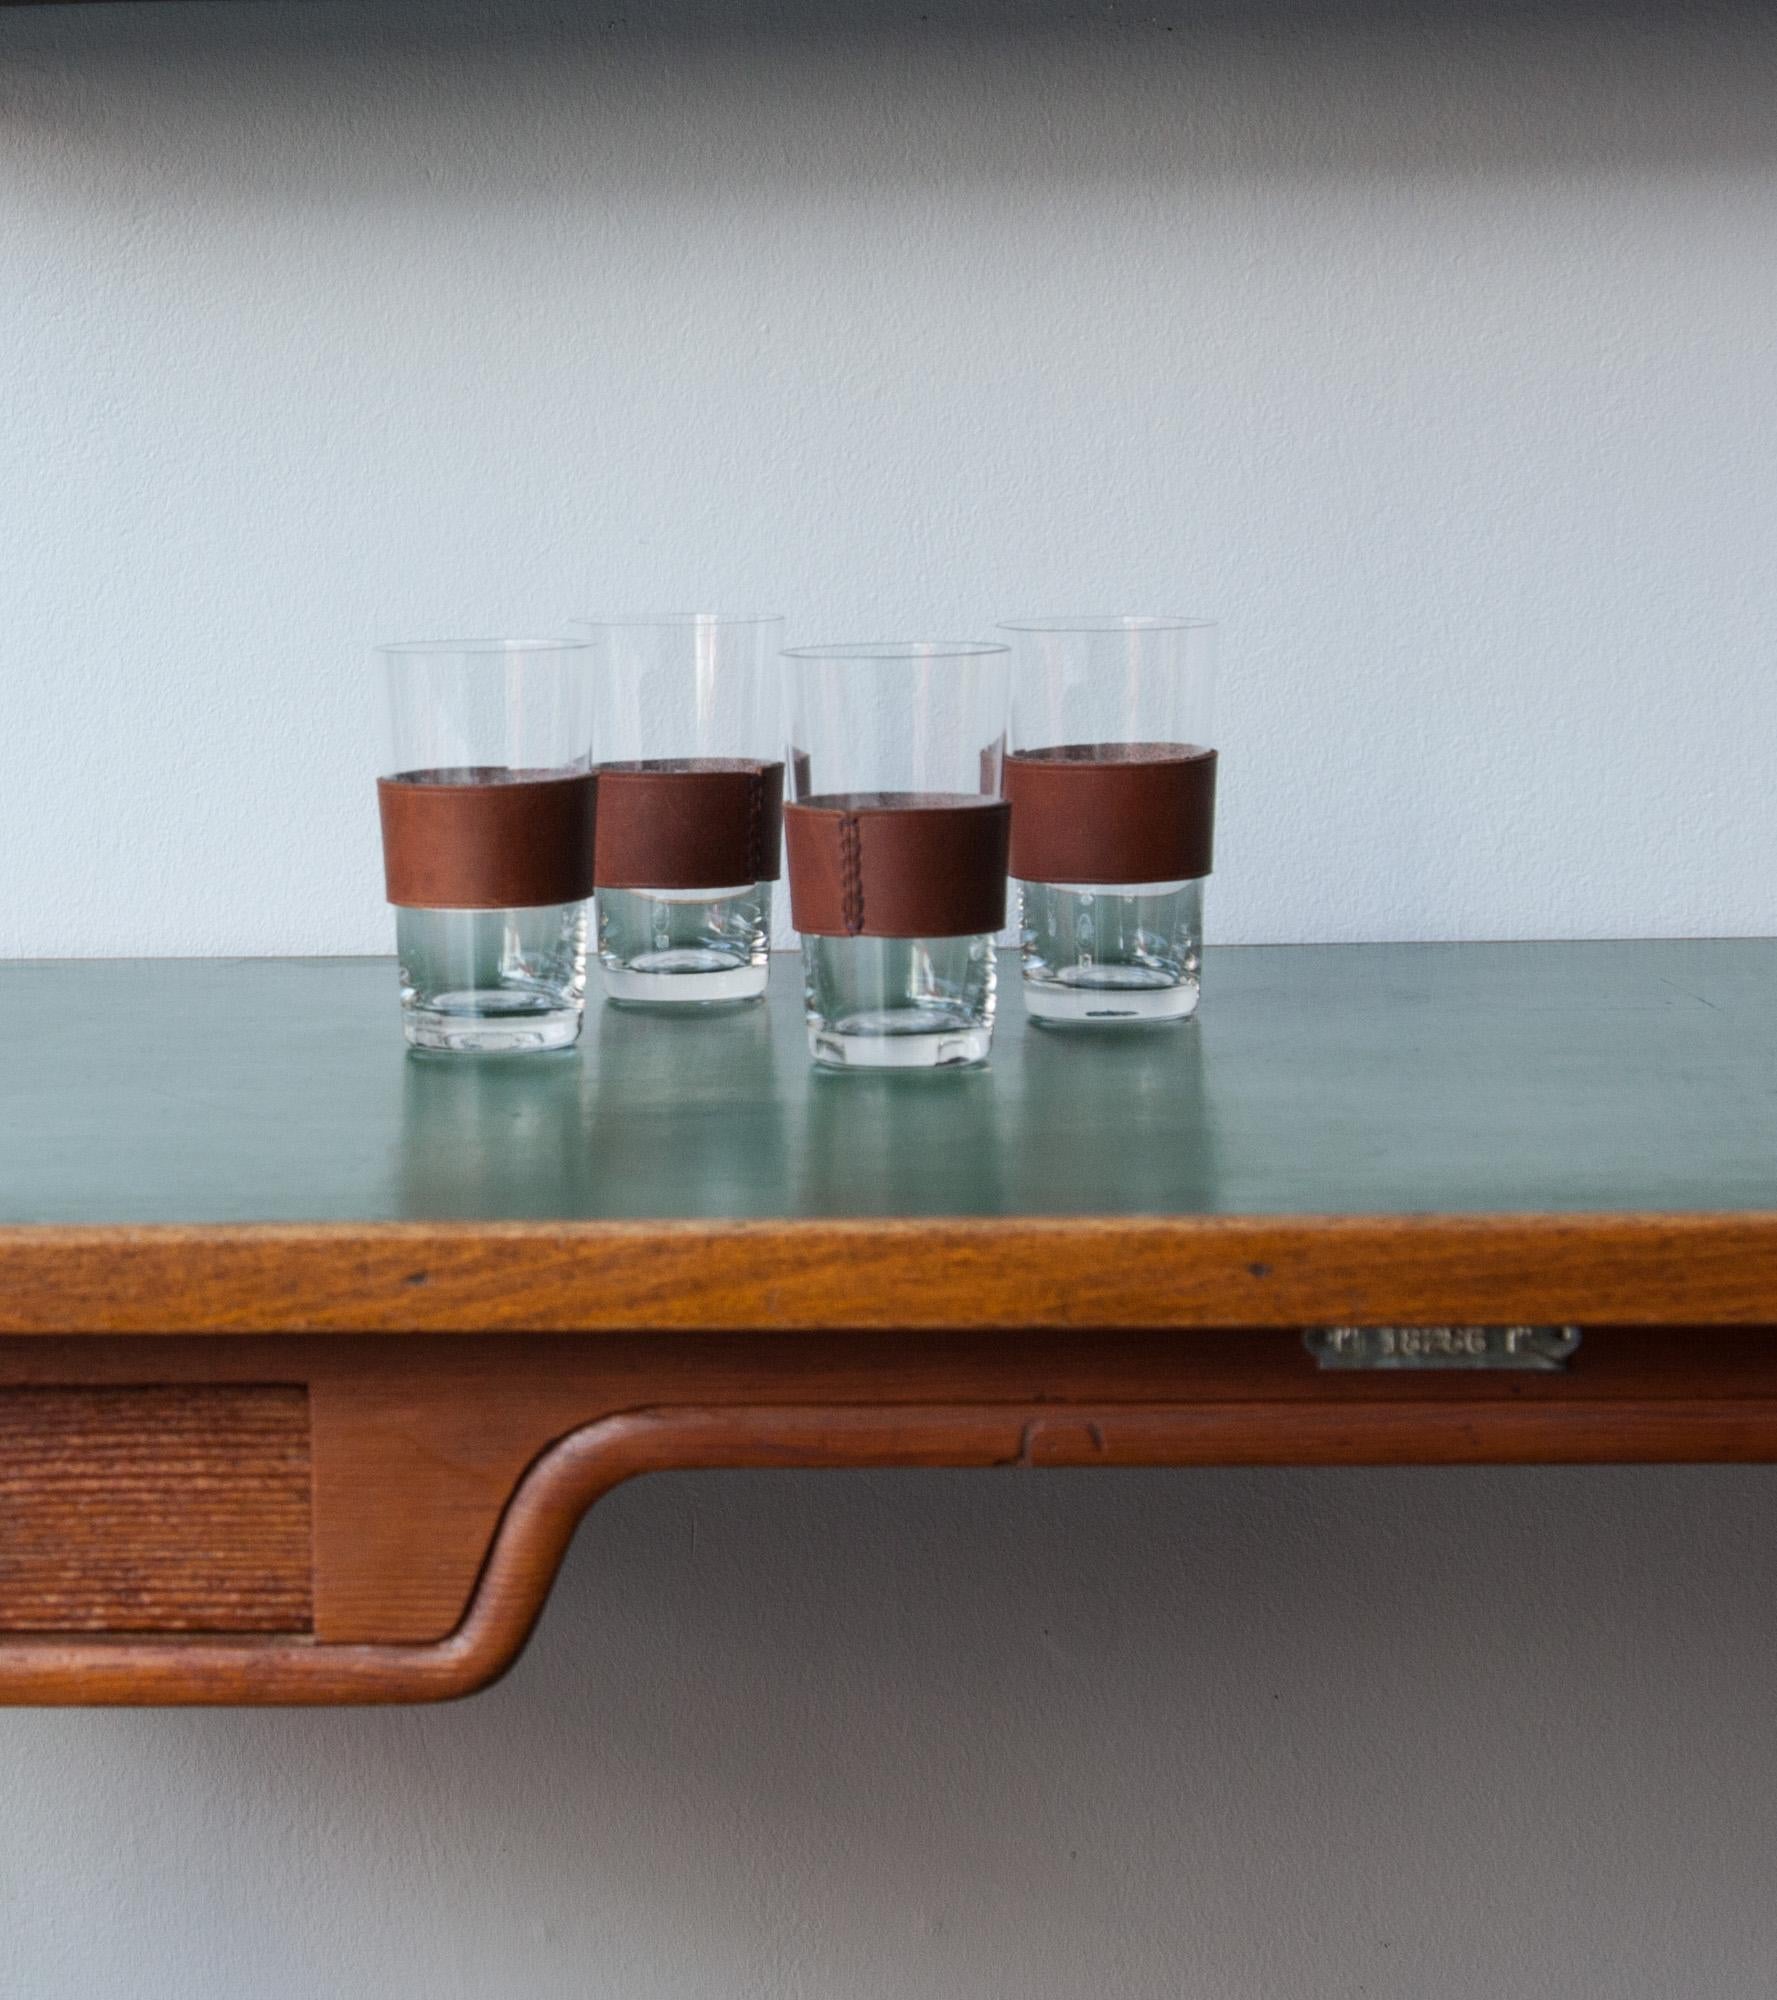 A set of four glasses with leather handle by Carl Auböck II, Vienna, circa 1950s.
The leather handles have a rich dark brown colour and are hand stitched around the glasses with a black stitching. A simple and elegant design from the Auböck